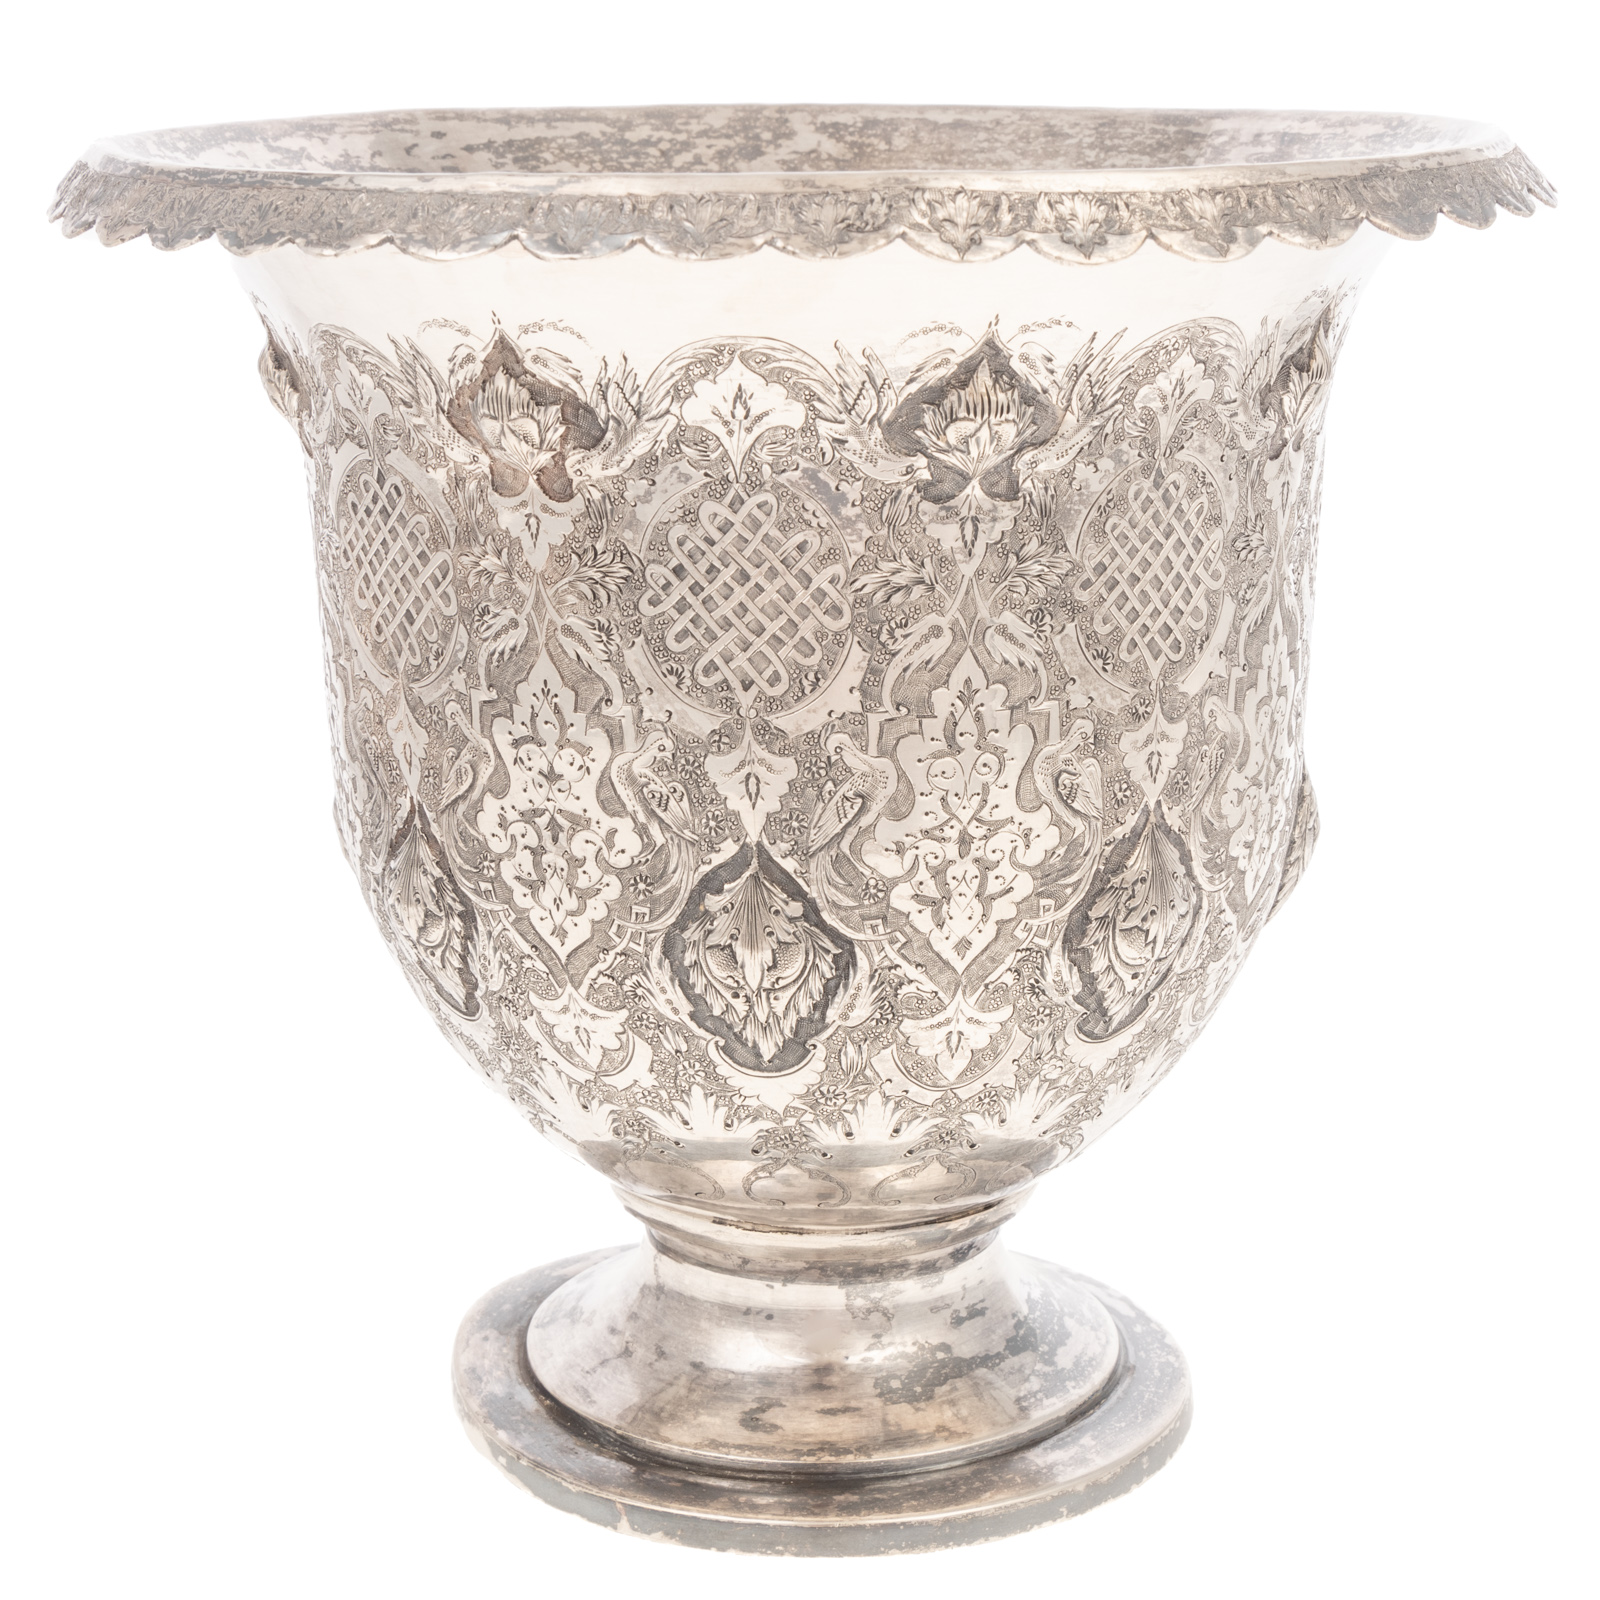 PERSIAN SILVER URN Early-to-mid